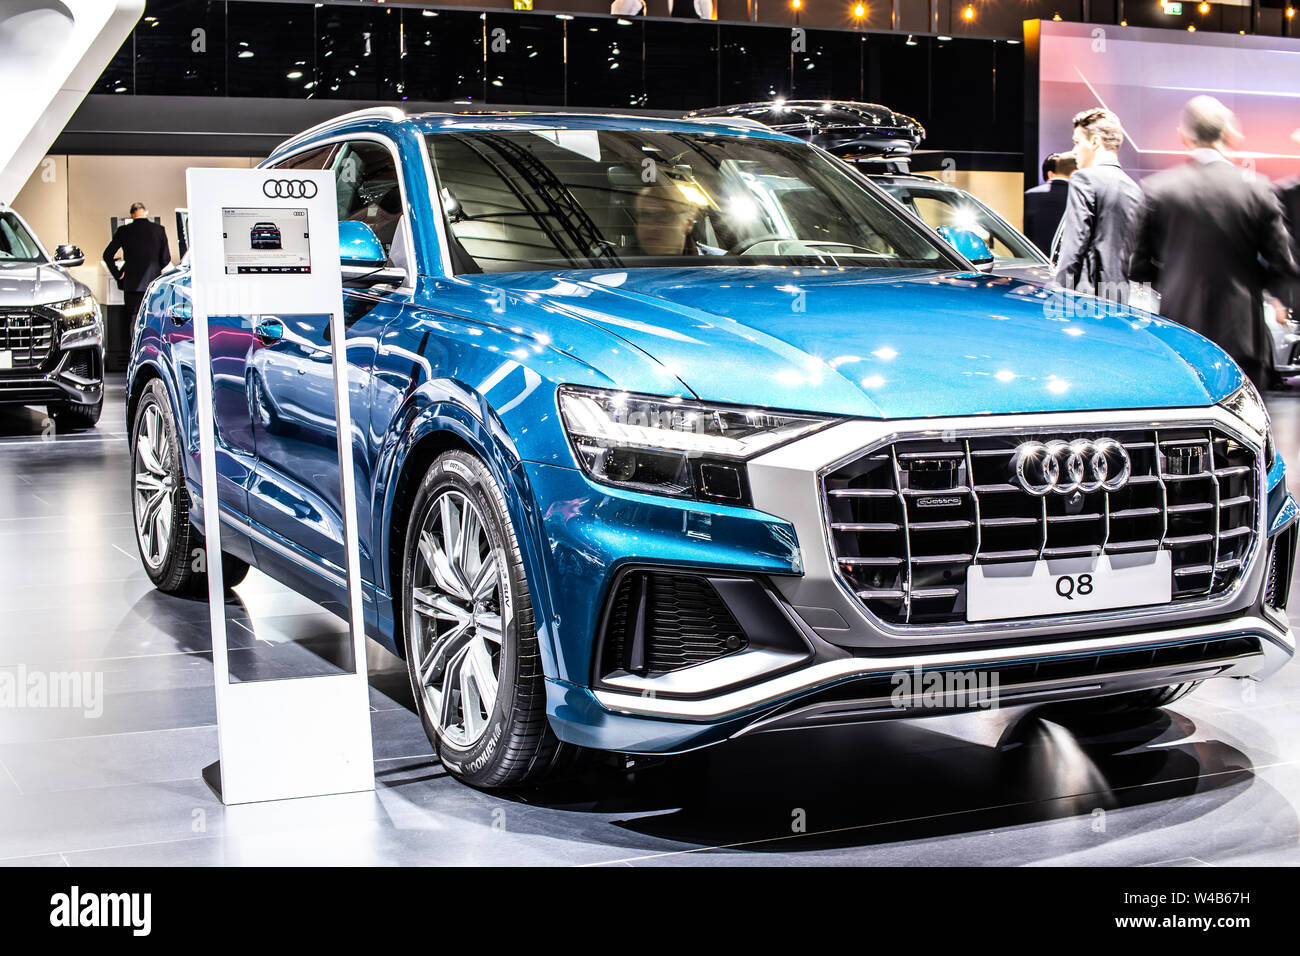 Brussels, Belgium, Jan 2019: metallic blue all new Audi Q8 at Brussels Motor Show, 1st gen, SUV produced by German automobile manufacturer Audi AG Stock Photo